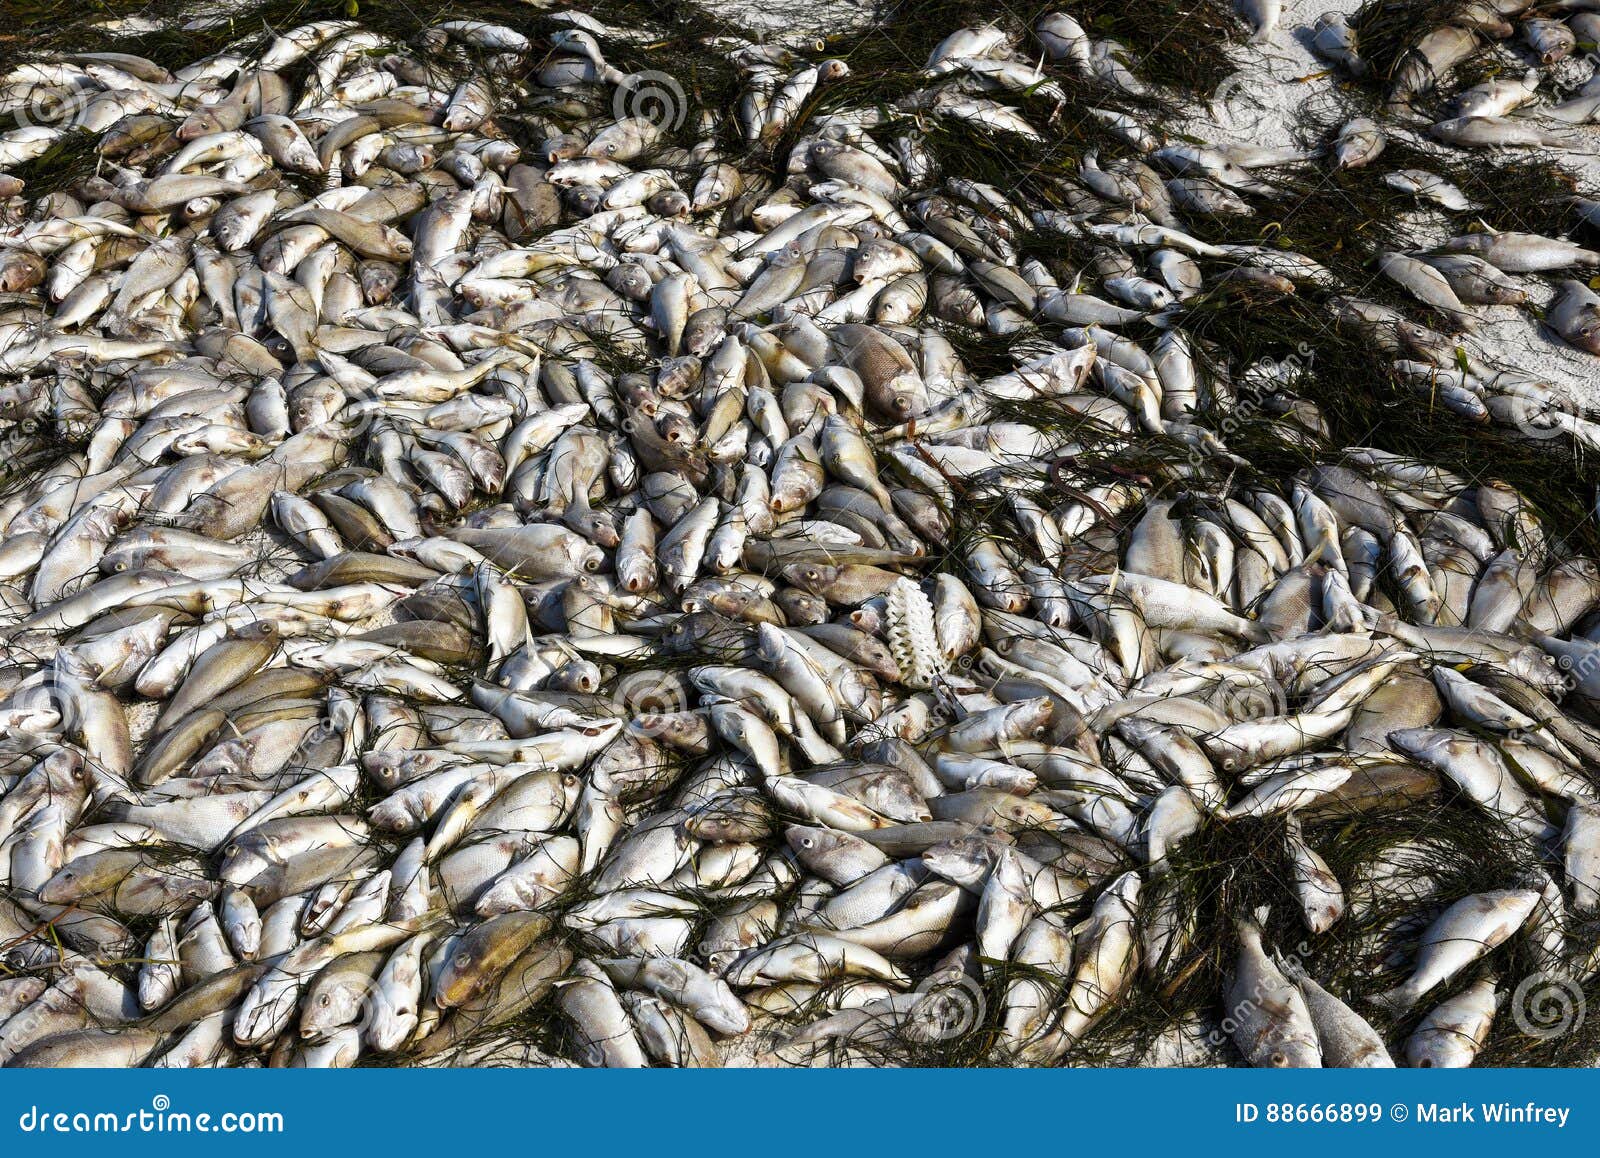 Dead Fish stock image. Image of blooms, environment, ecology - 88666899